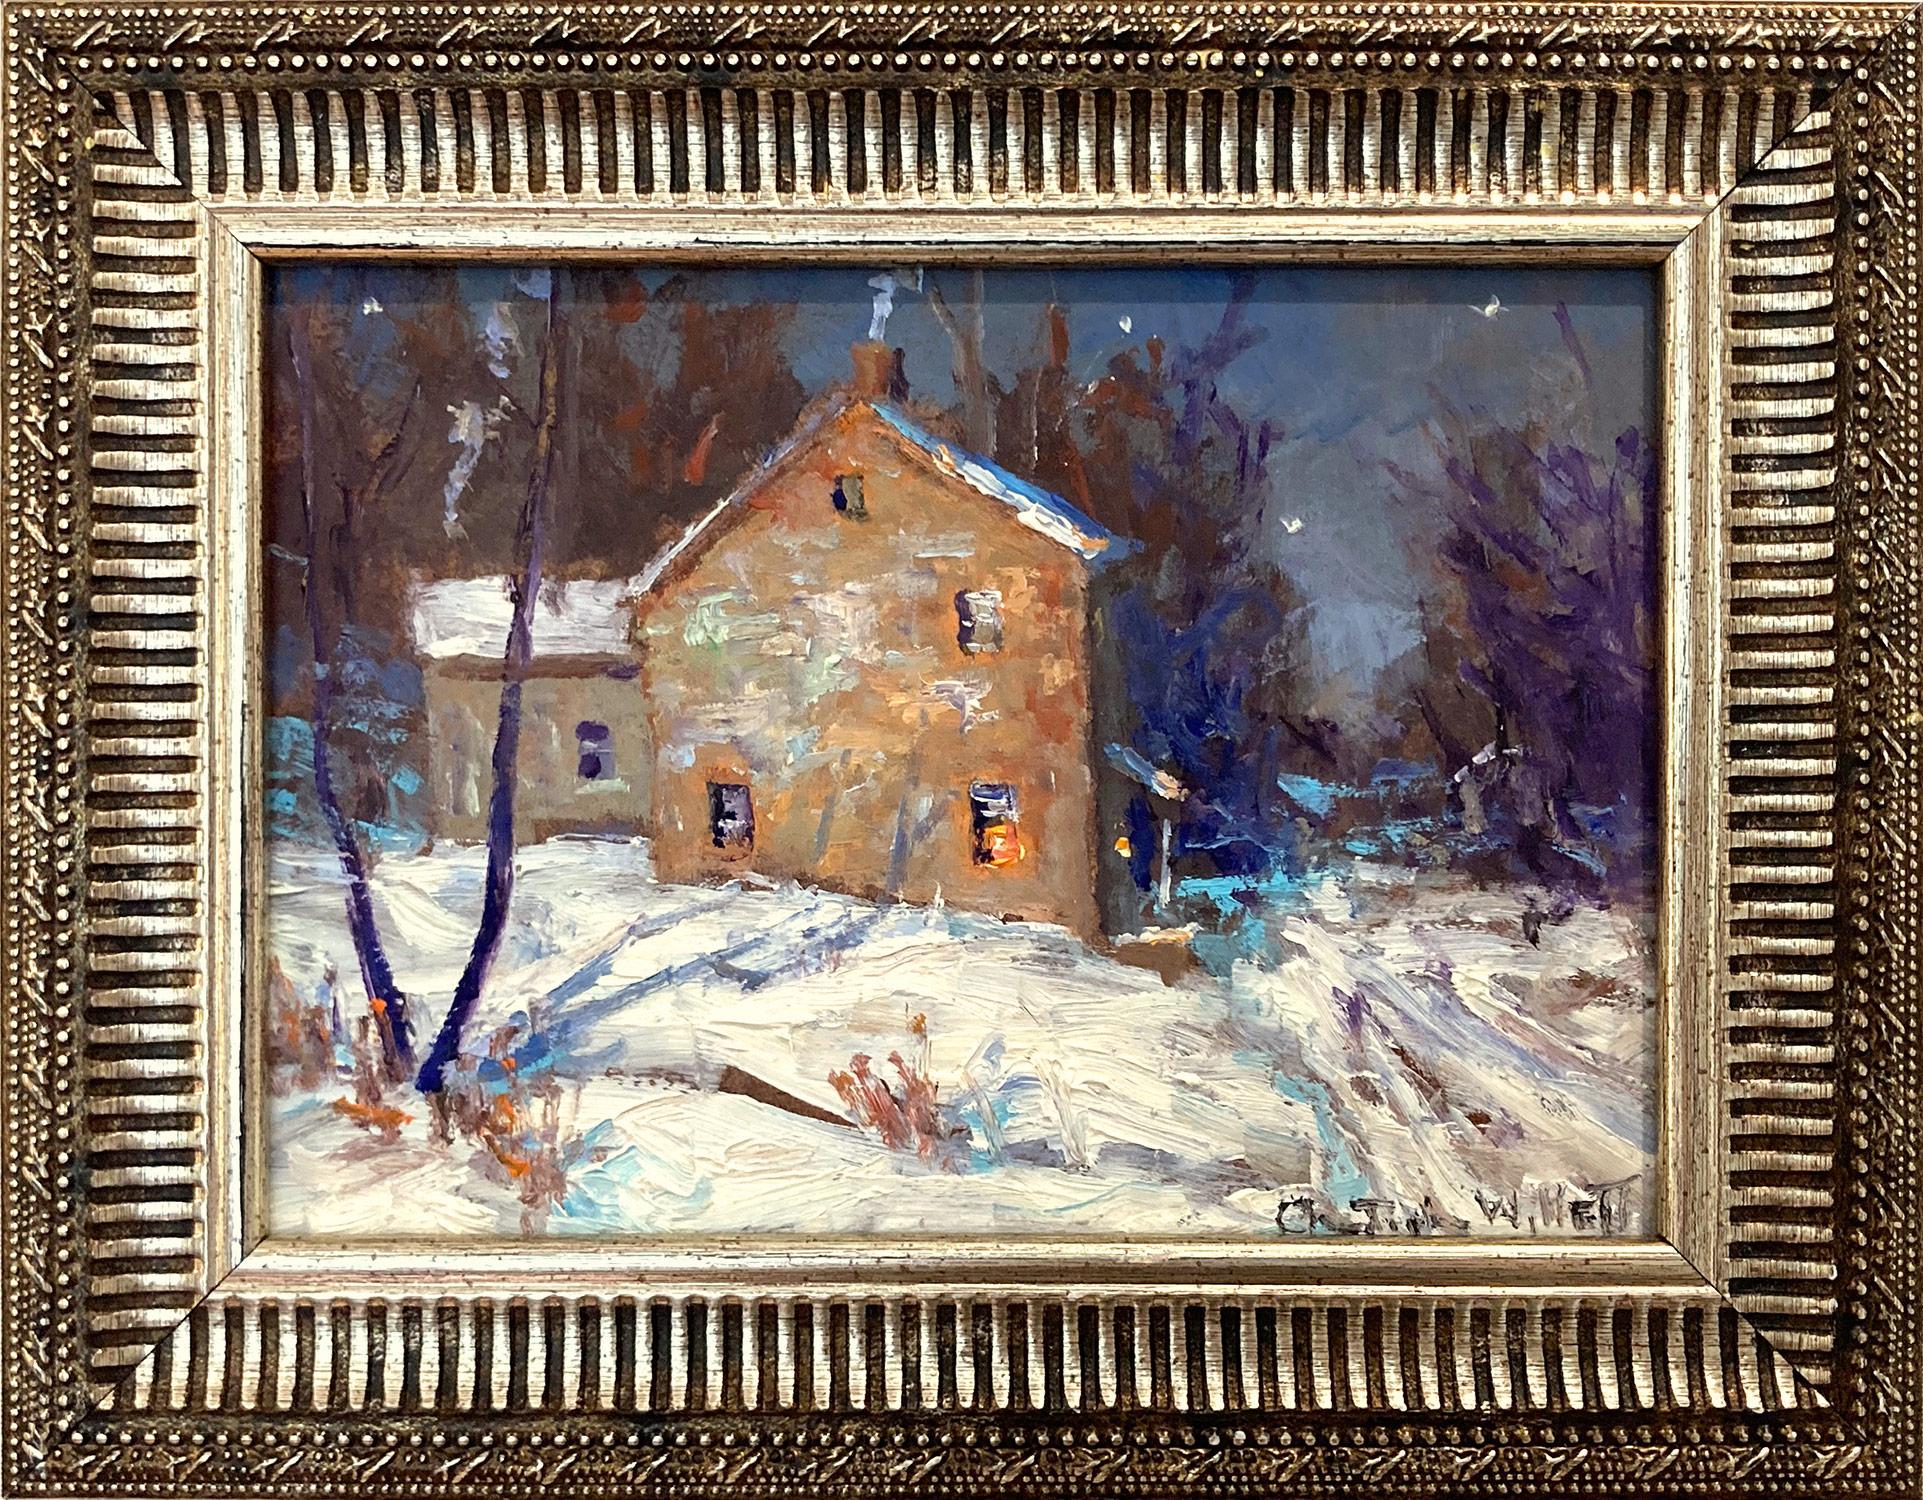 Christopher Willett Landscape Painting - "House on River Rd by Bowman's Tower'" Bucks County PA Night Snow Scene Painting